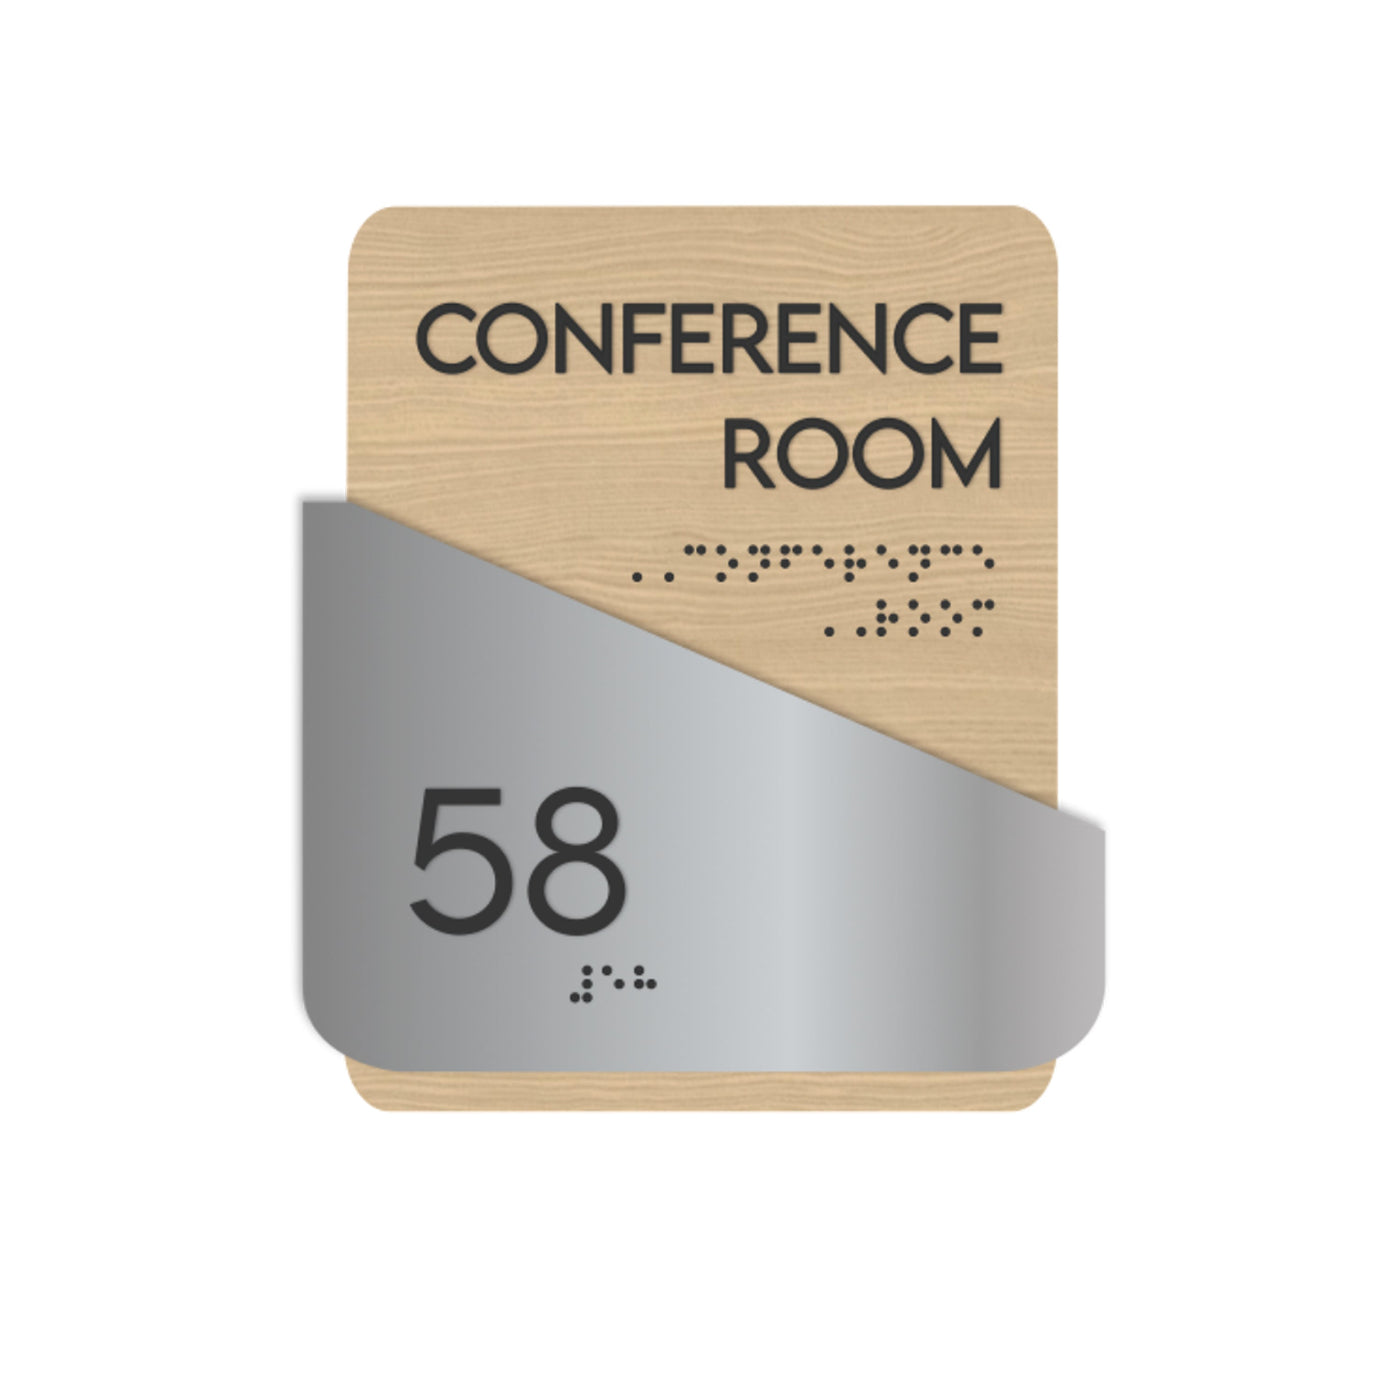 Conference Room Signs - Stainless Steel & Wood Door Plate "Downhill" Design